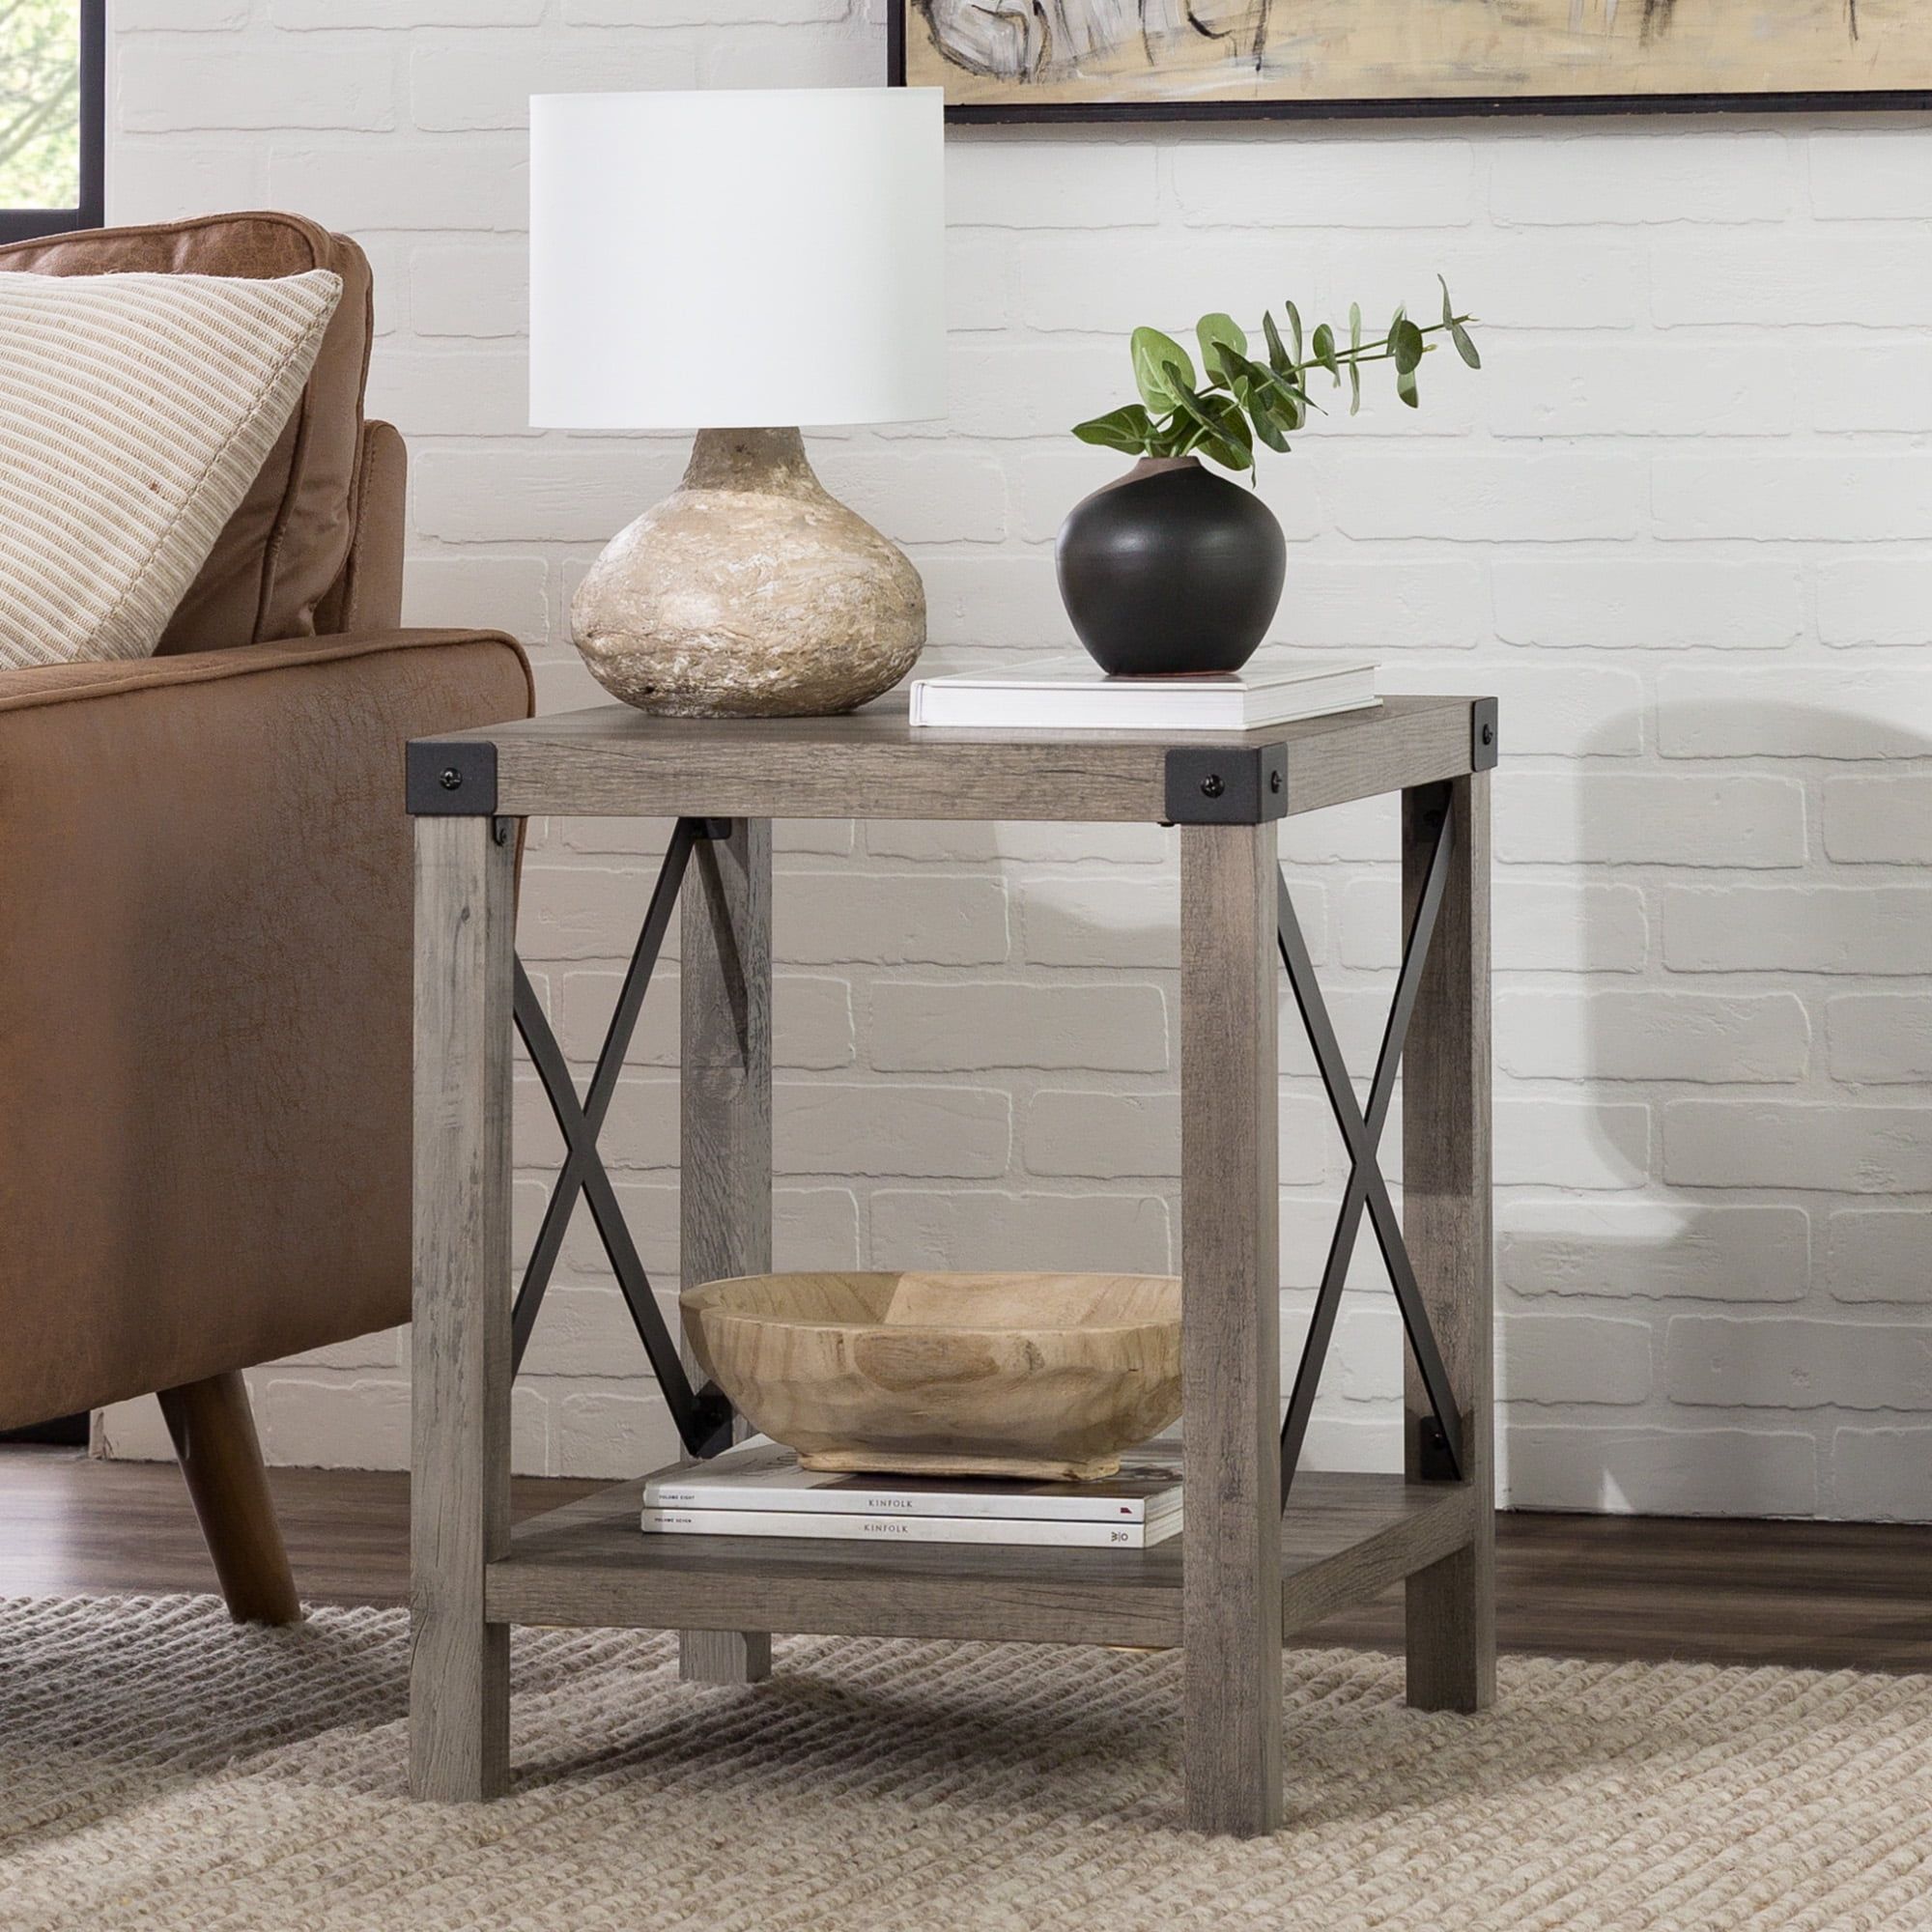 Woven Paths Magnolia Metal X End Table, Grey Wash – Walmart Within Rustic Gray End Tables (View 3 of 15)